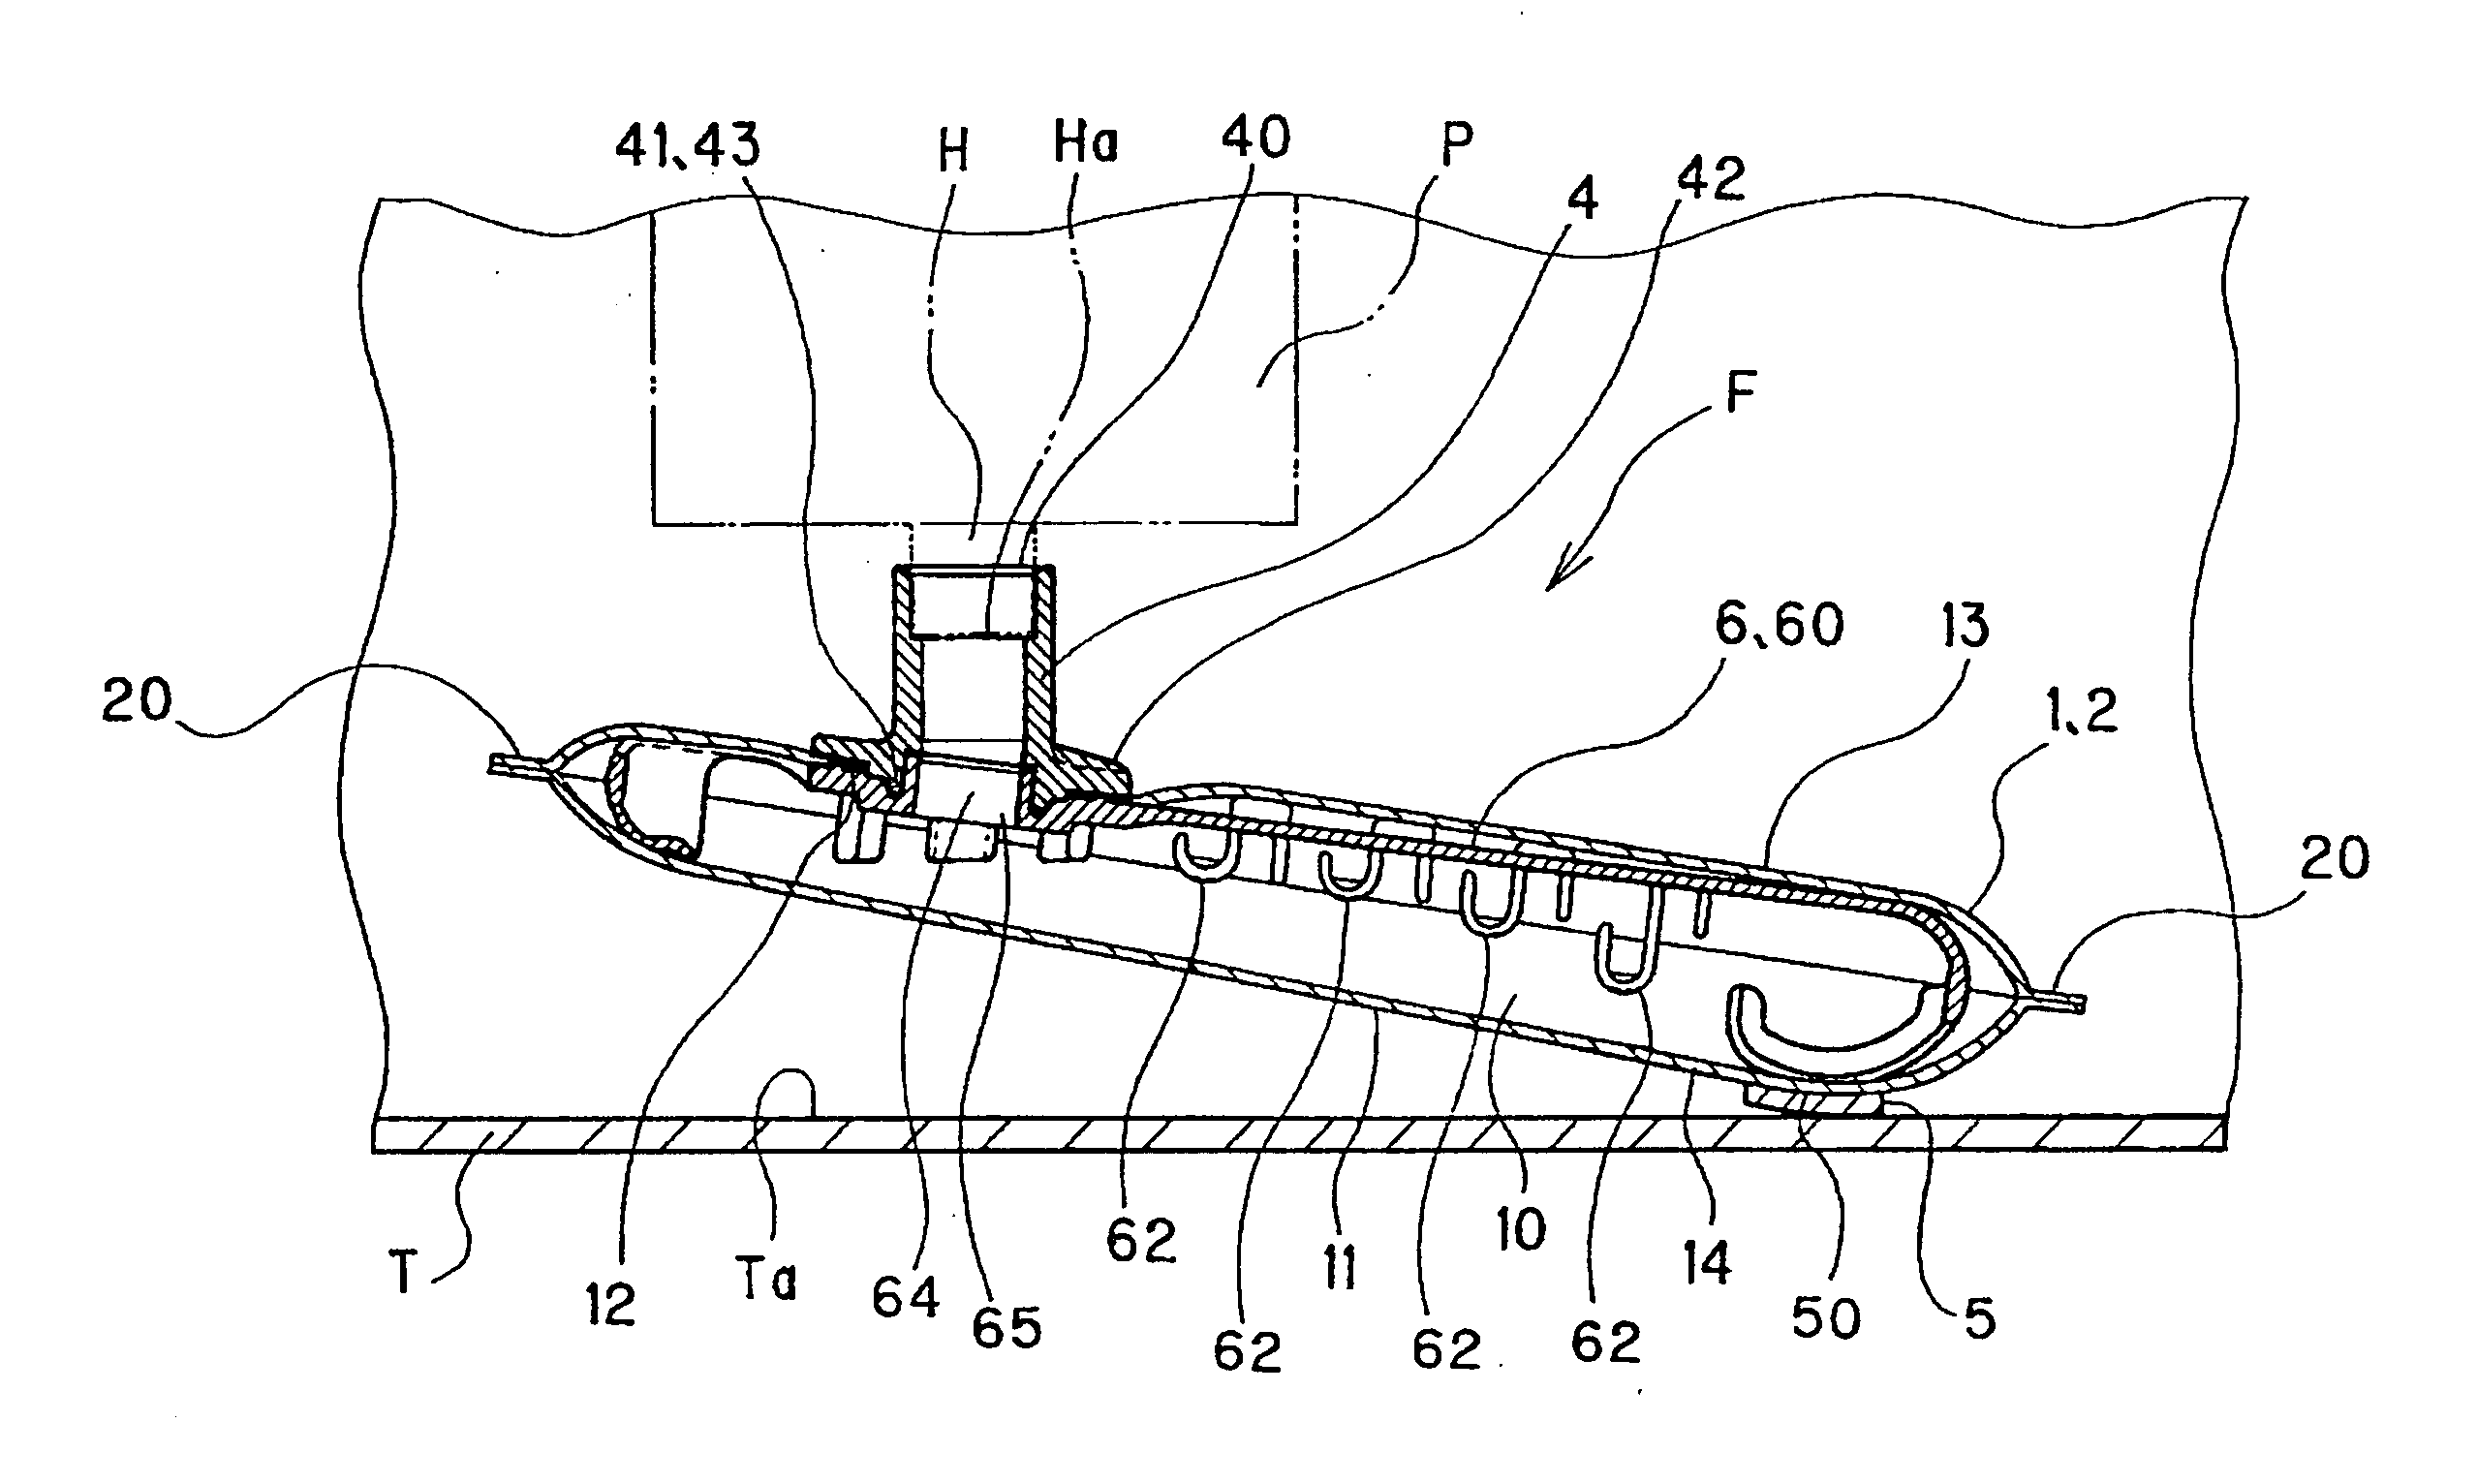 Fuel-filtering device